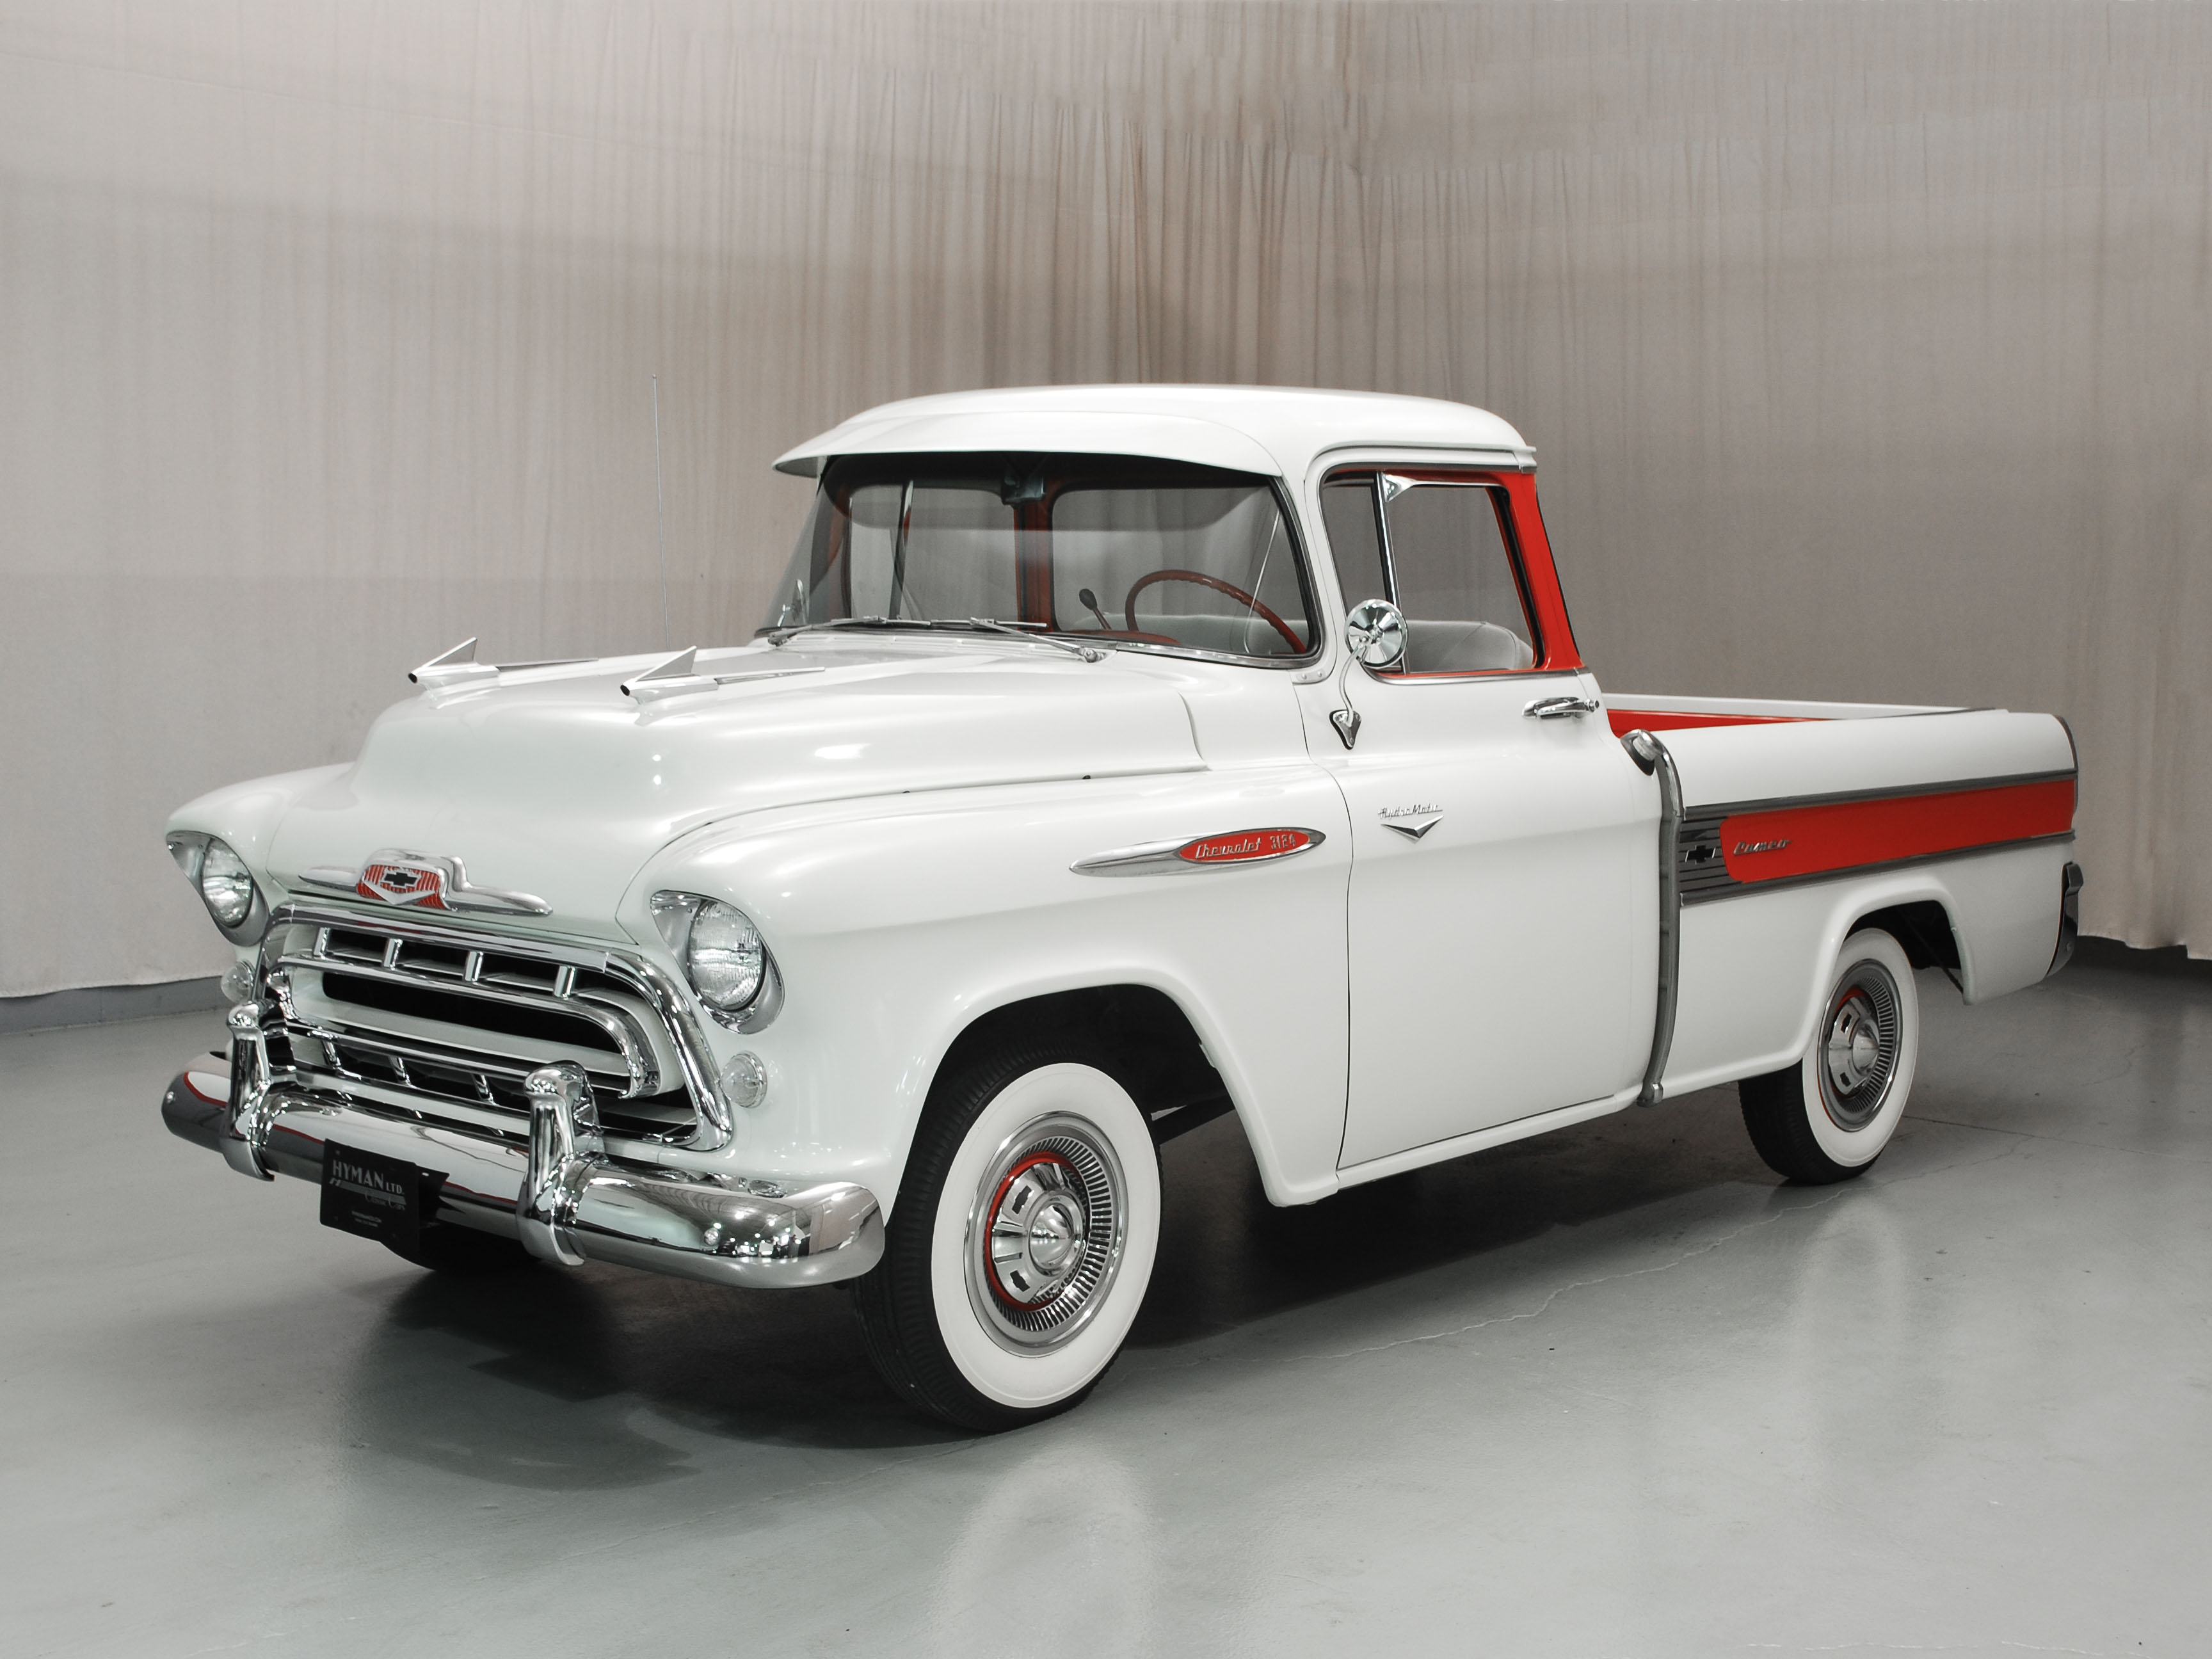 1959 Chevrolet Series 3100 1/2 Ton | Hagerty Valuation Tools